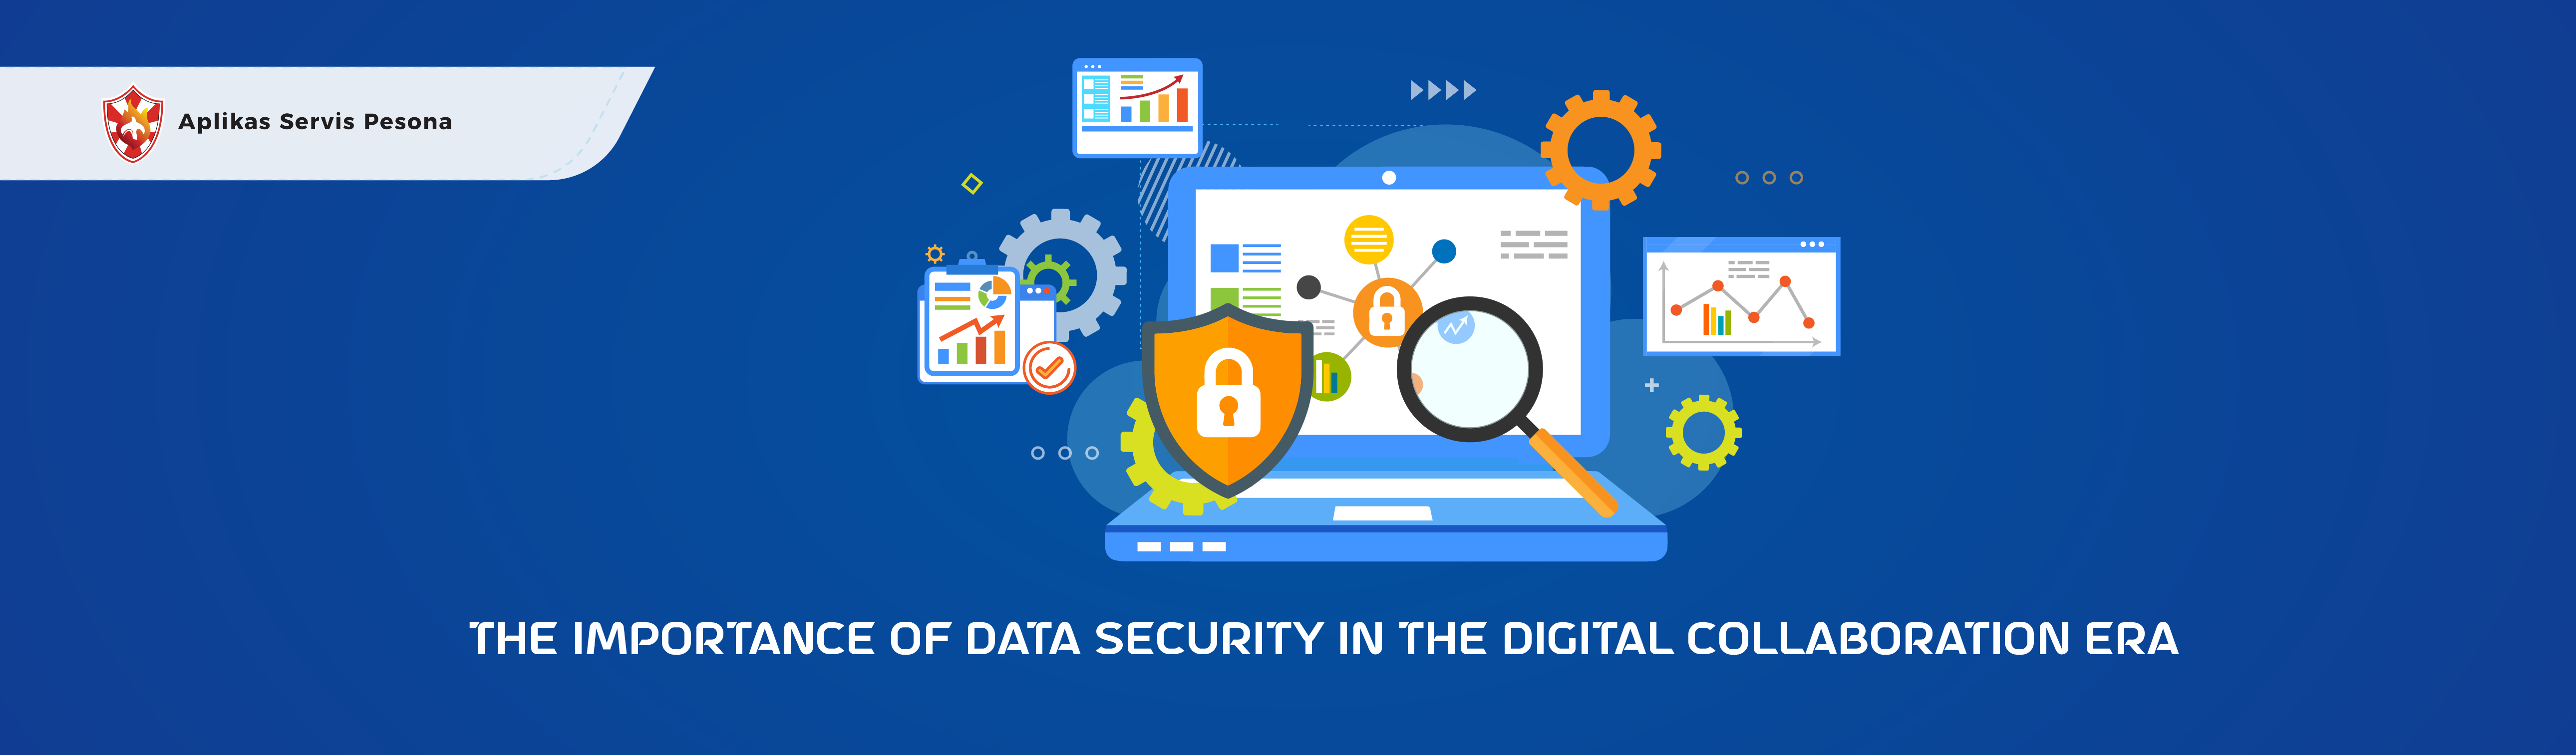 The Importance Data Security in The Digital Collaboration Era